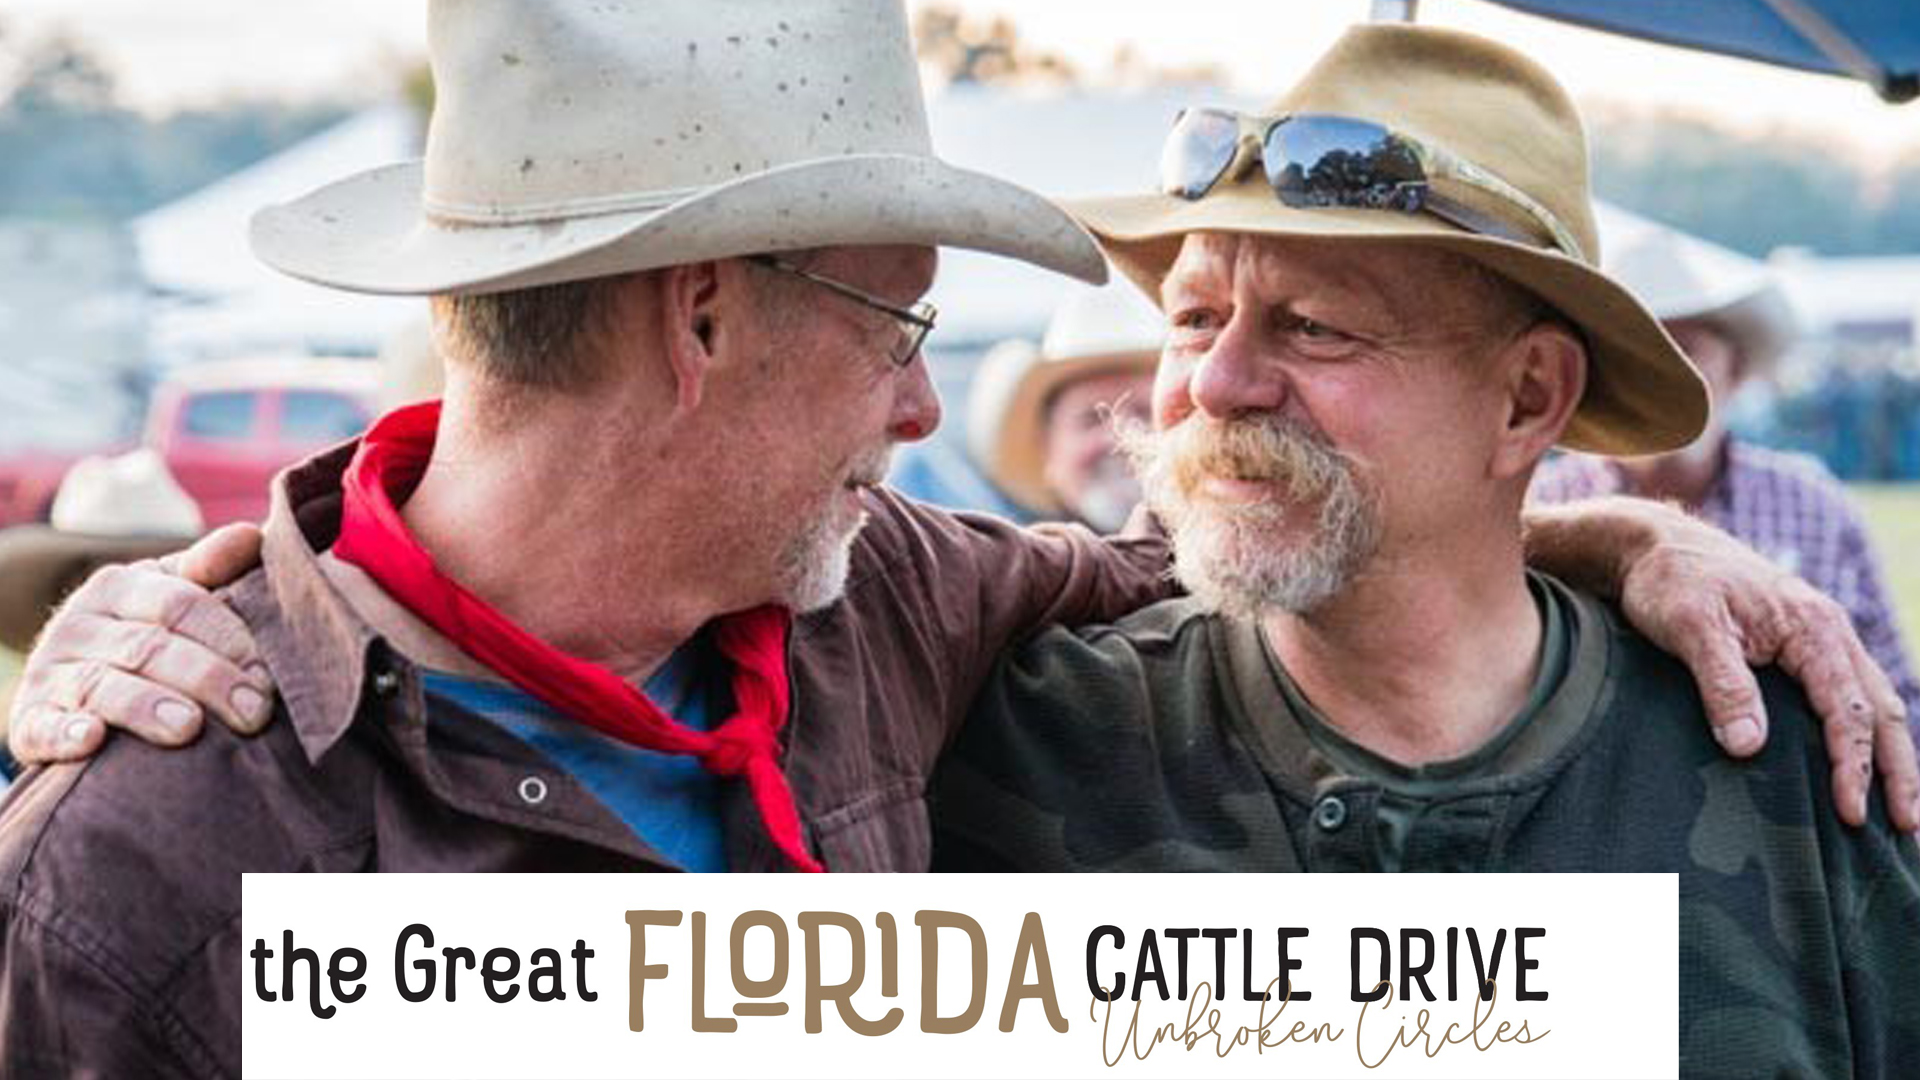 A veteran and a man who drove a wagon for the Great Florida Cattle Drive 2016 smile at each other.